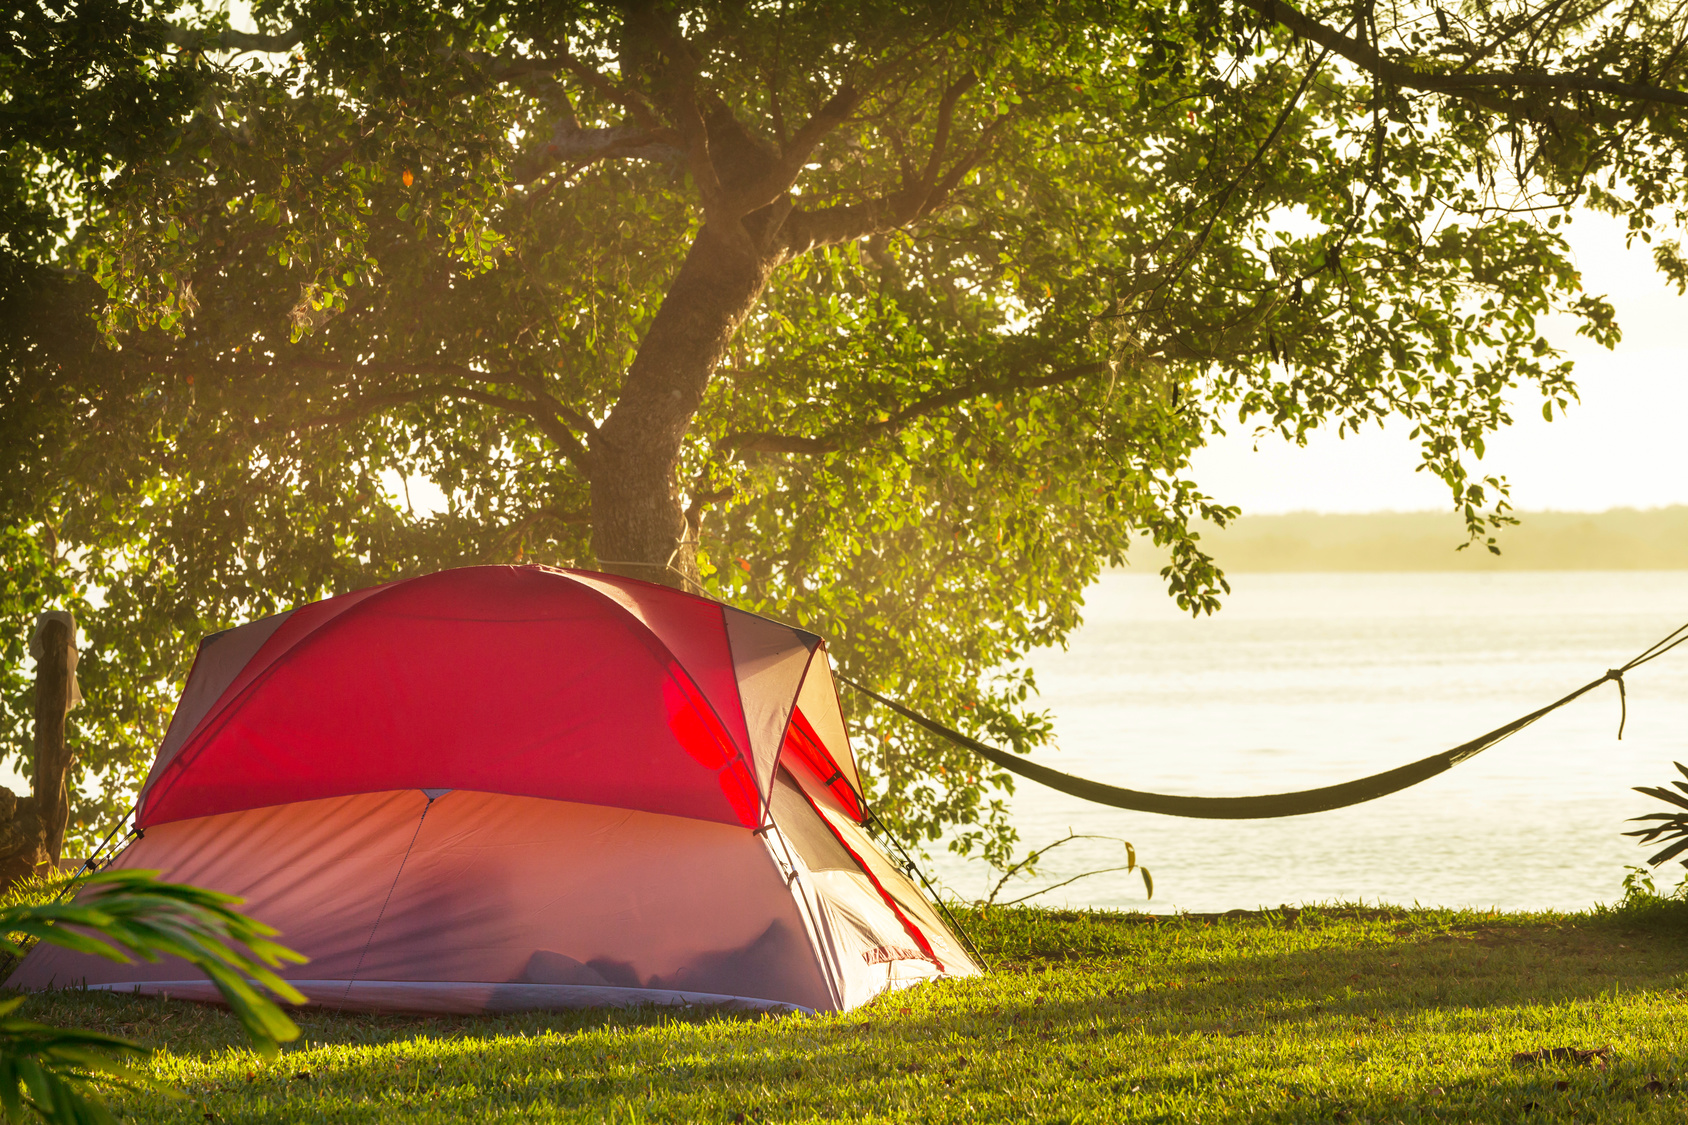 5 Things to Keep in Mind While Camping